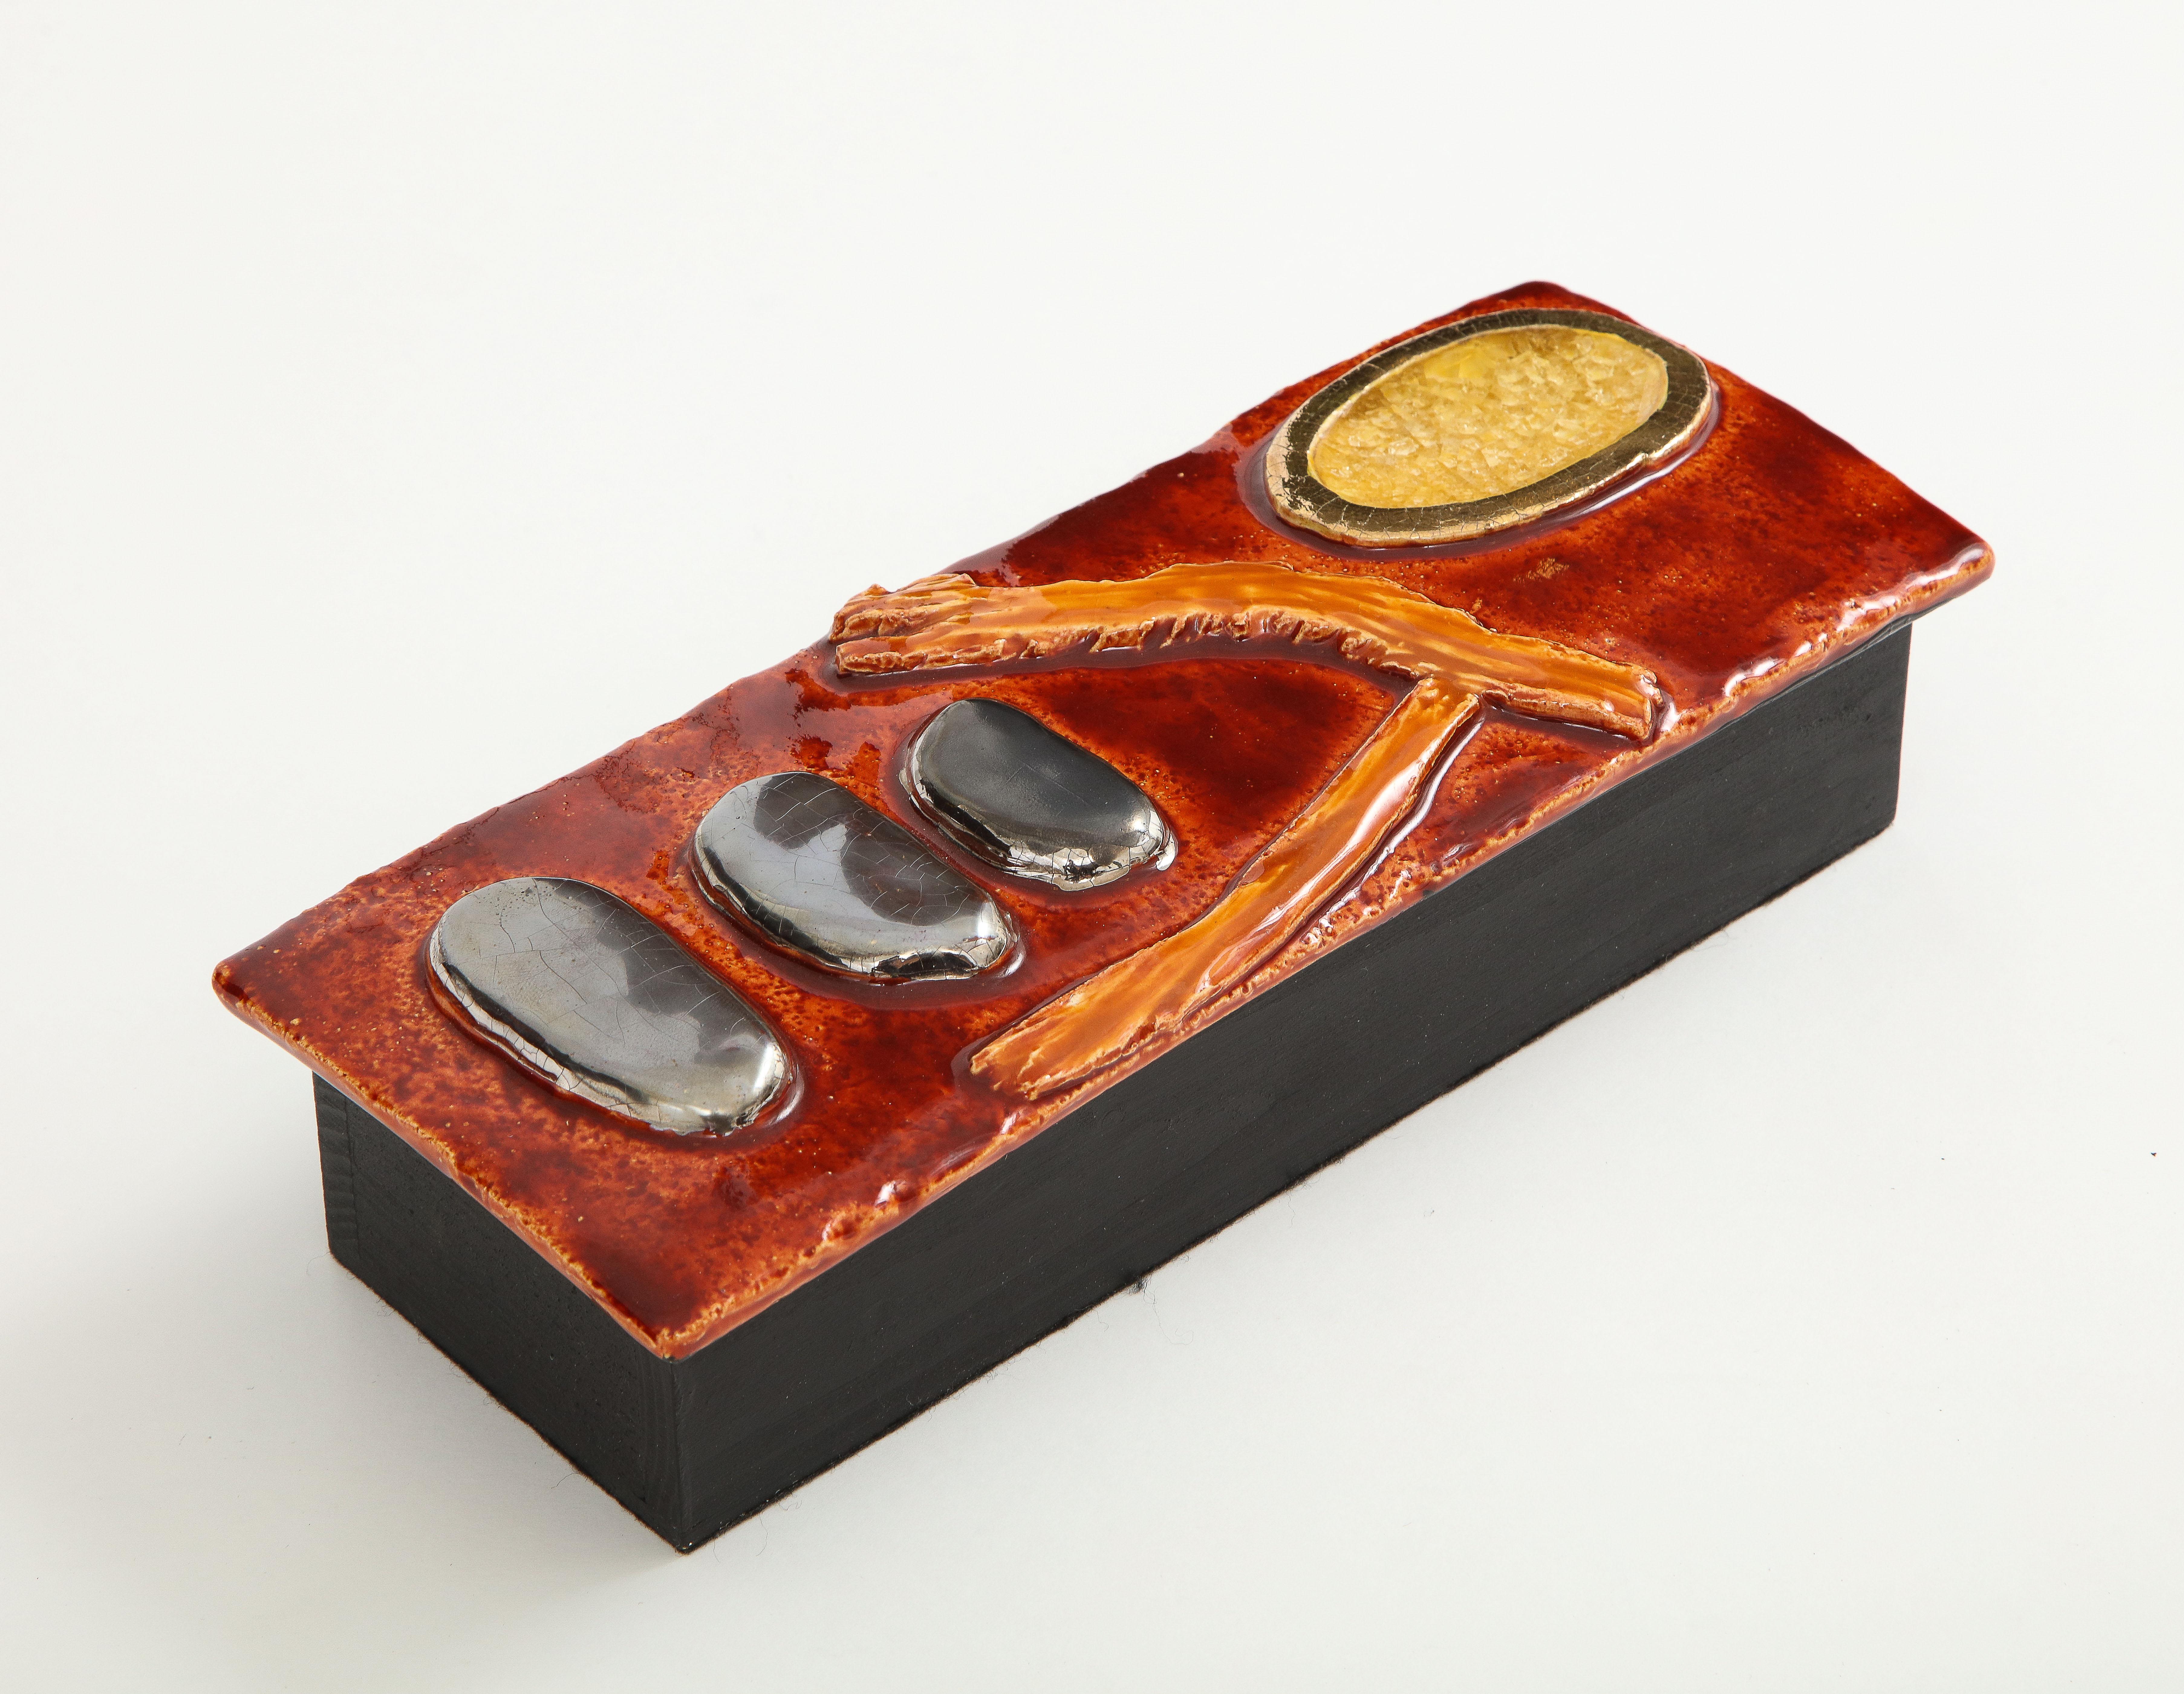 French Enameled Ceramic Box by Marion De Crecy, France, circa 1975